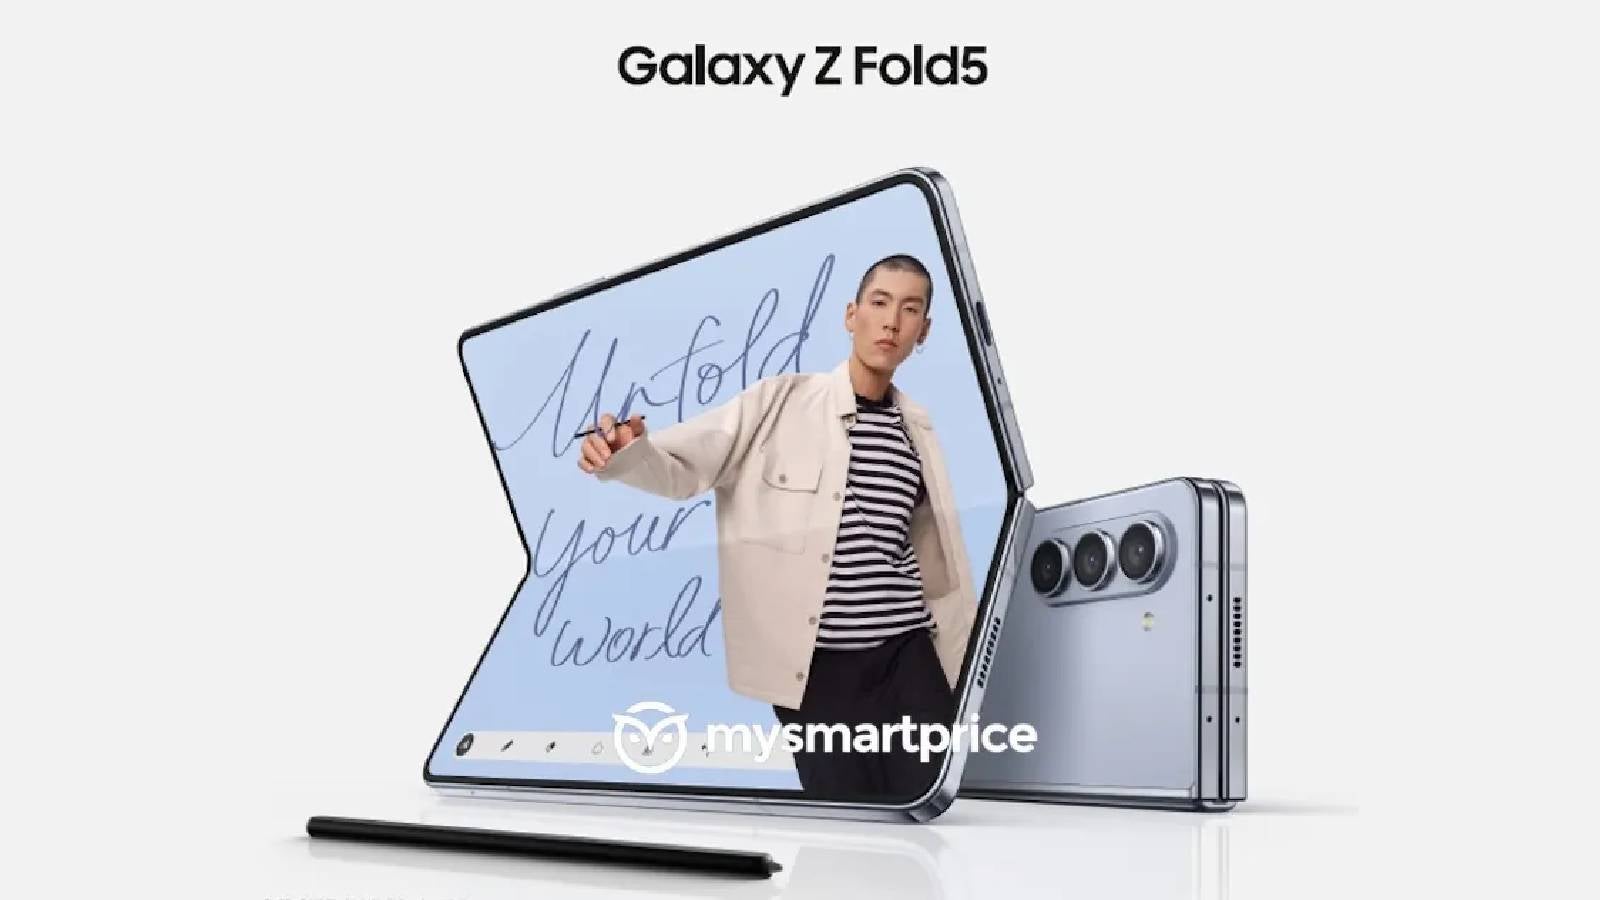 Leaked Galaxy Z Fold 5 poster - Alleged Galaxy Z Fold 5 marketing poster shows the biggest design change